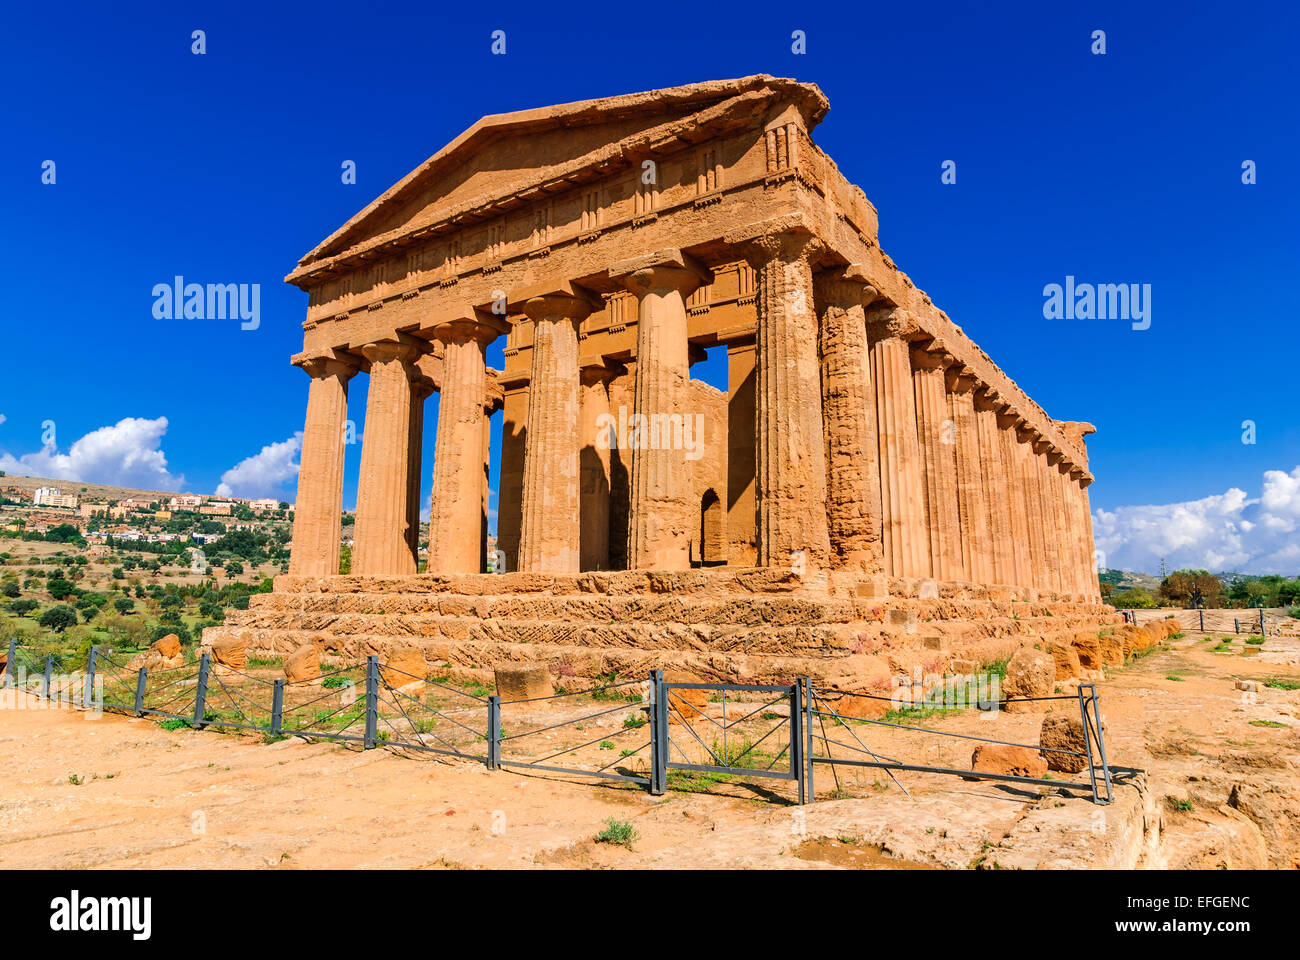 Sicily. Temple of Concord with 34 columns one of the best preserved greek Doric temples in the world, Valle dei Tiempli in Agrig Stock Photo